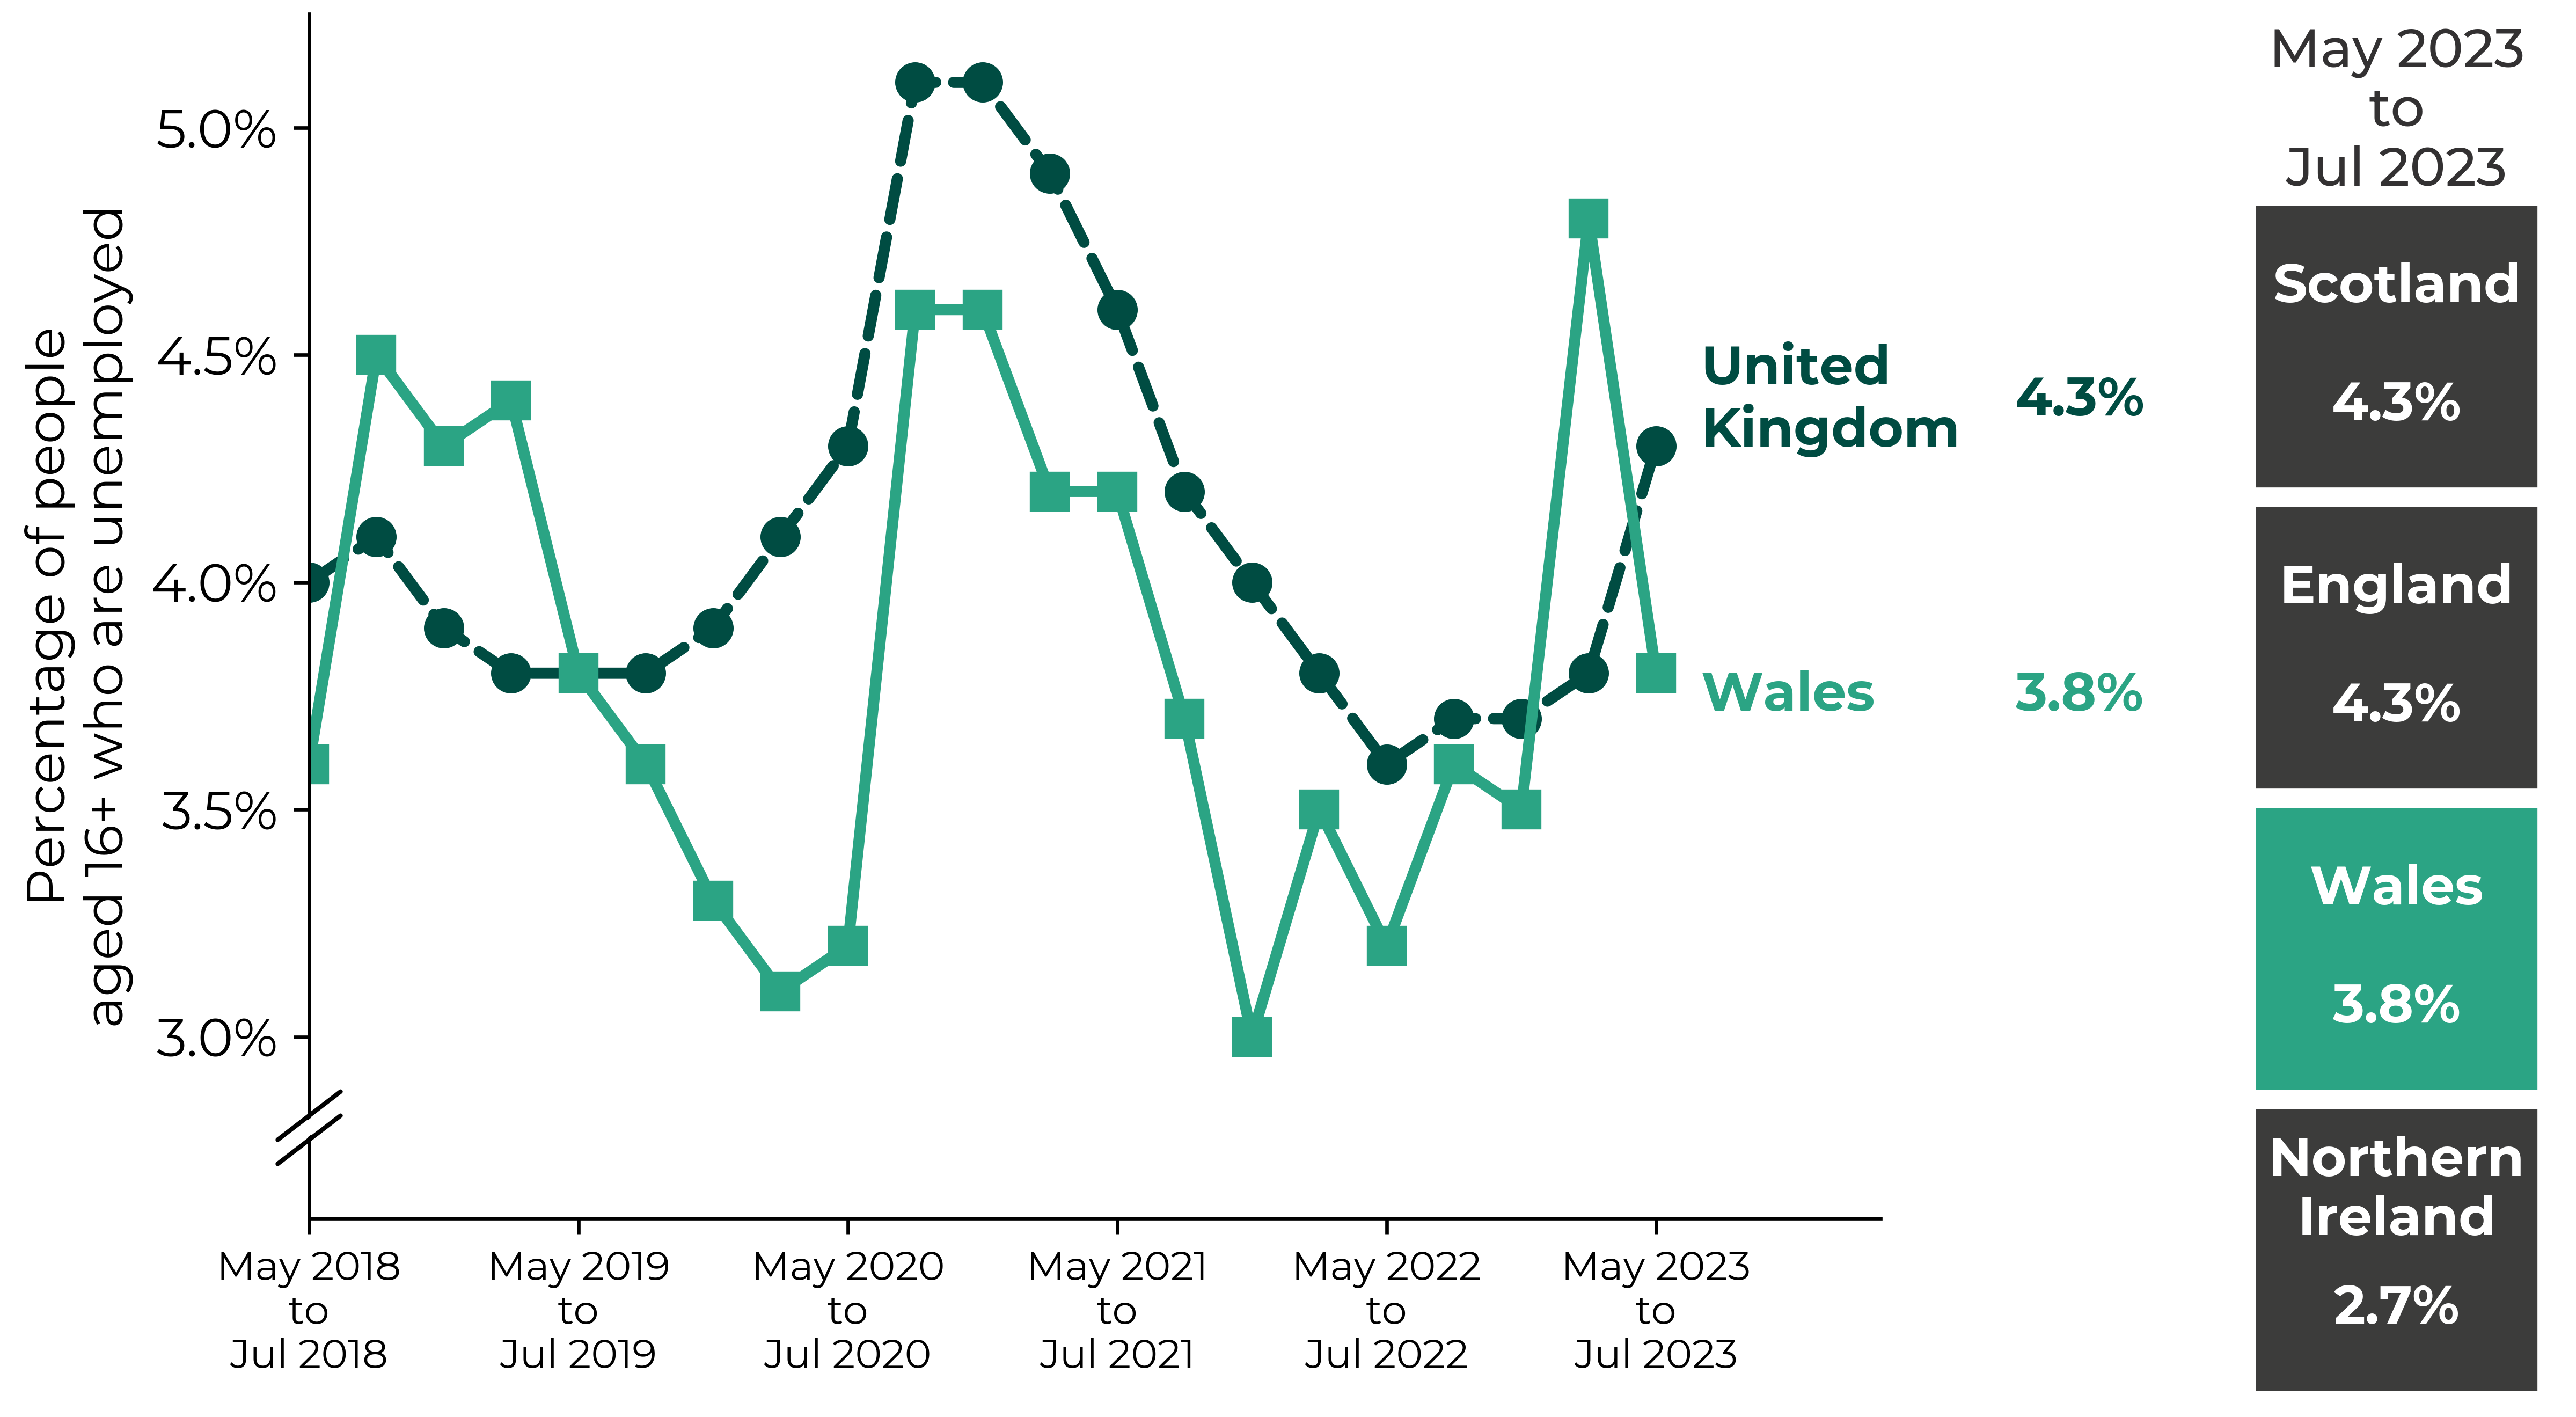 Graph showing an overall decrease in Wales' unemployment rate from over 4% in 2018 to under 3% in early 2020. This was followed by a peak of almost 5% during 2021 and returning to around 3% by 2022. UK unemployment rate followed a similar pattern. Figures for the latest period (May 2023 to July 2023) are Northern Ireland 2.7%, Wales 3.8%, England 4.3%, Scotland 4.3% and UK 4.3%.